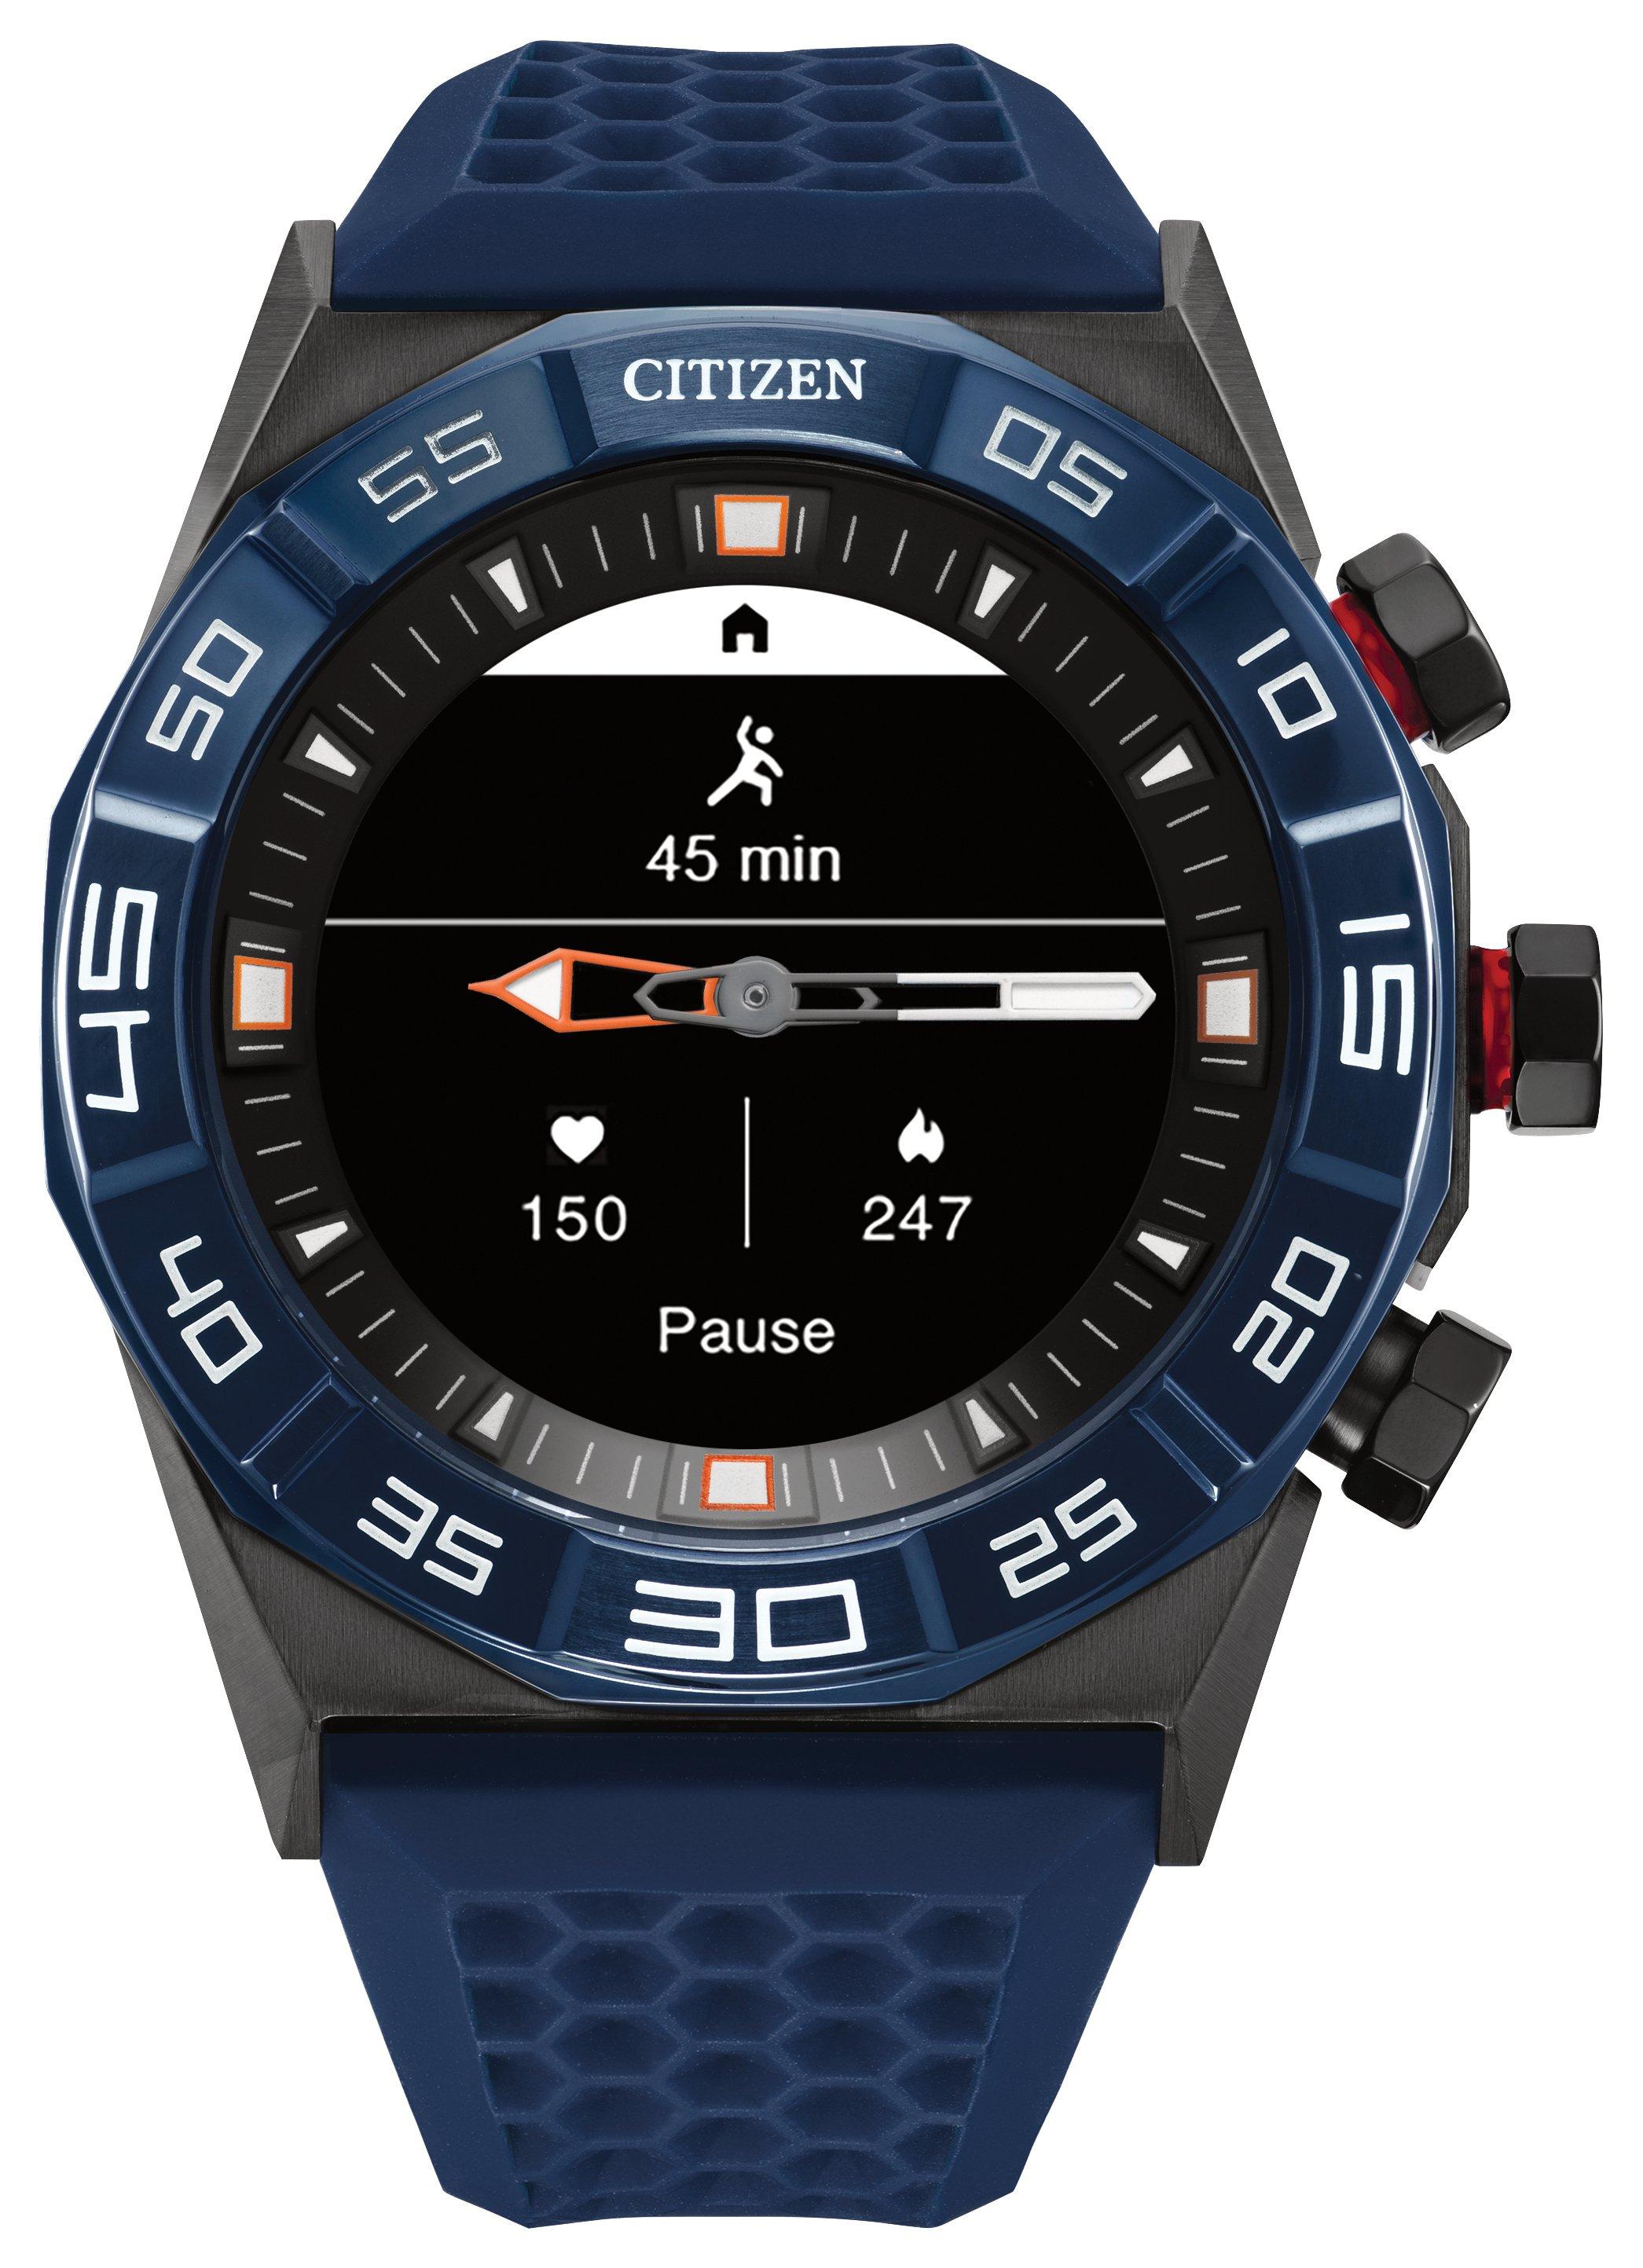 Citizen CZ Smart Hybrid 44mm Black Stainless Steel with Blue Silicone Strap Smartwatch